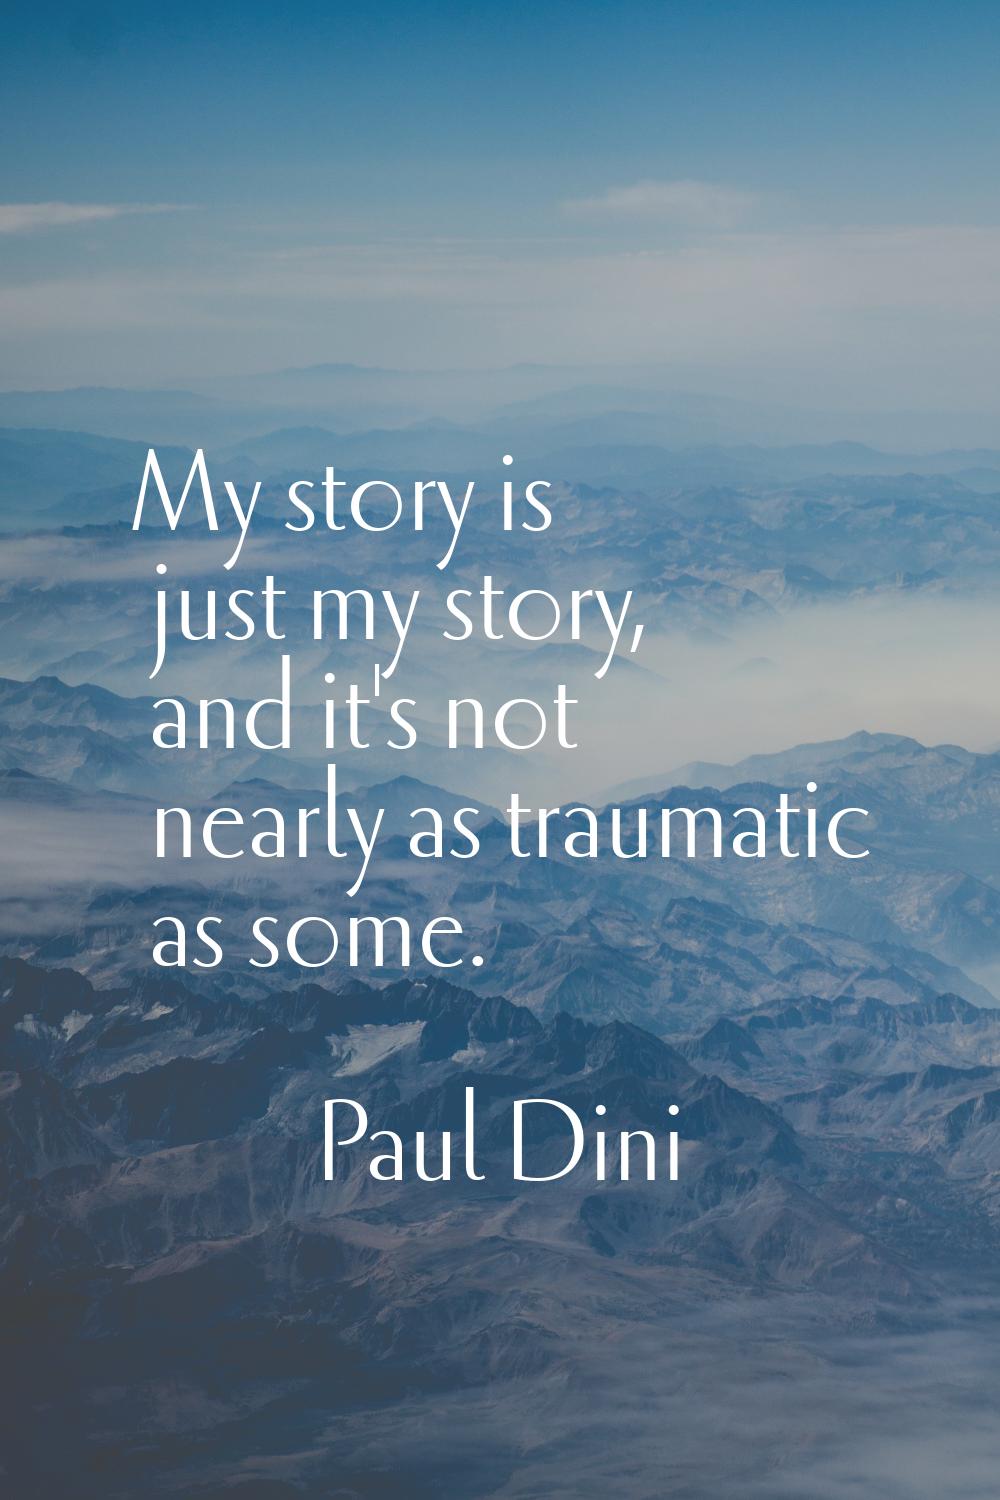 My story is just my story, and it's not nearly as traumatic as some.